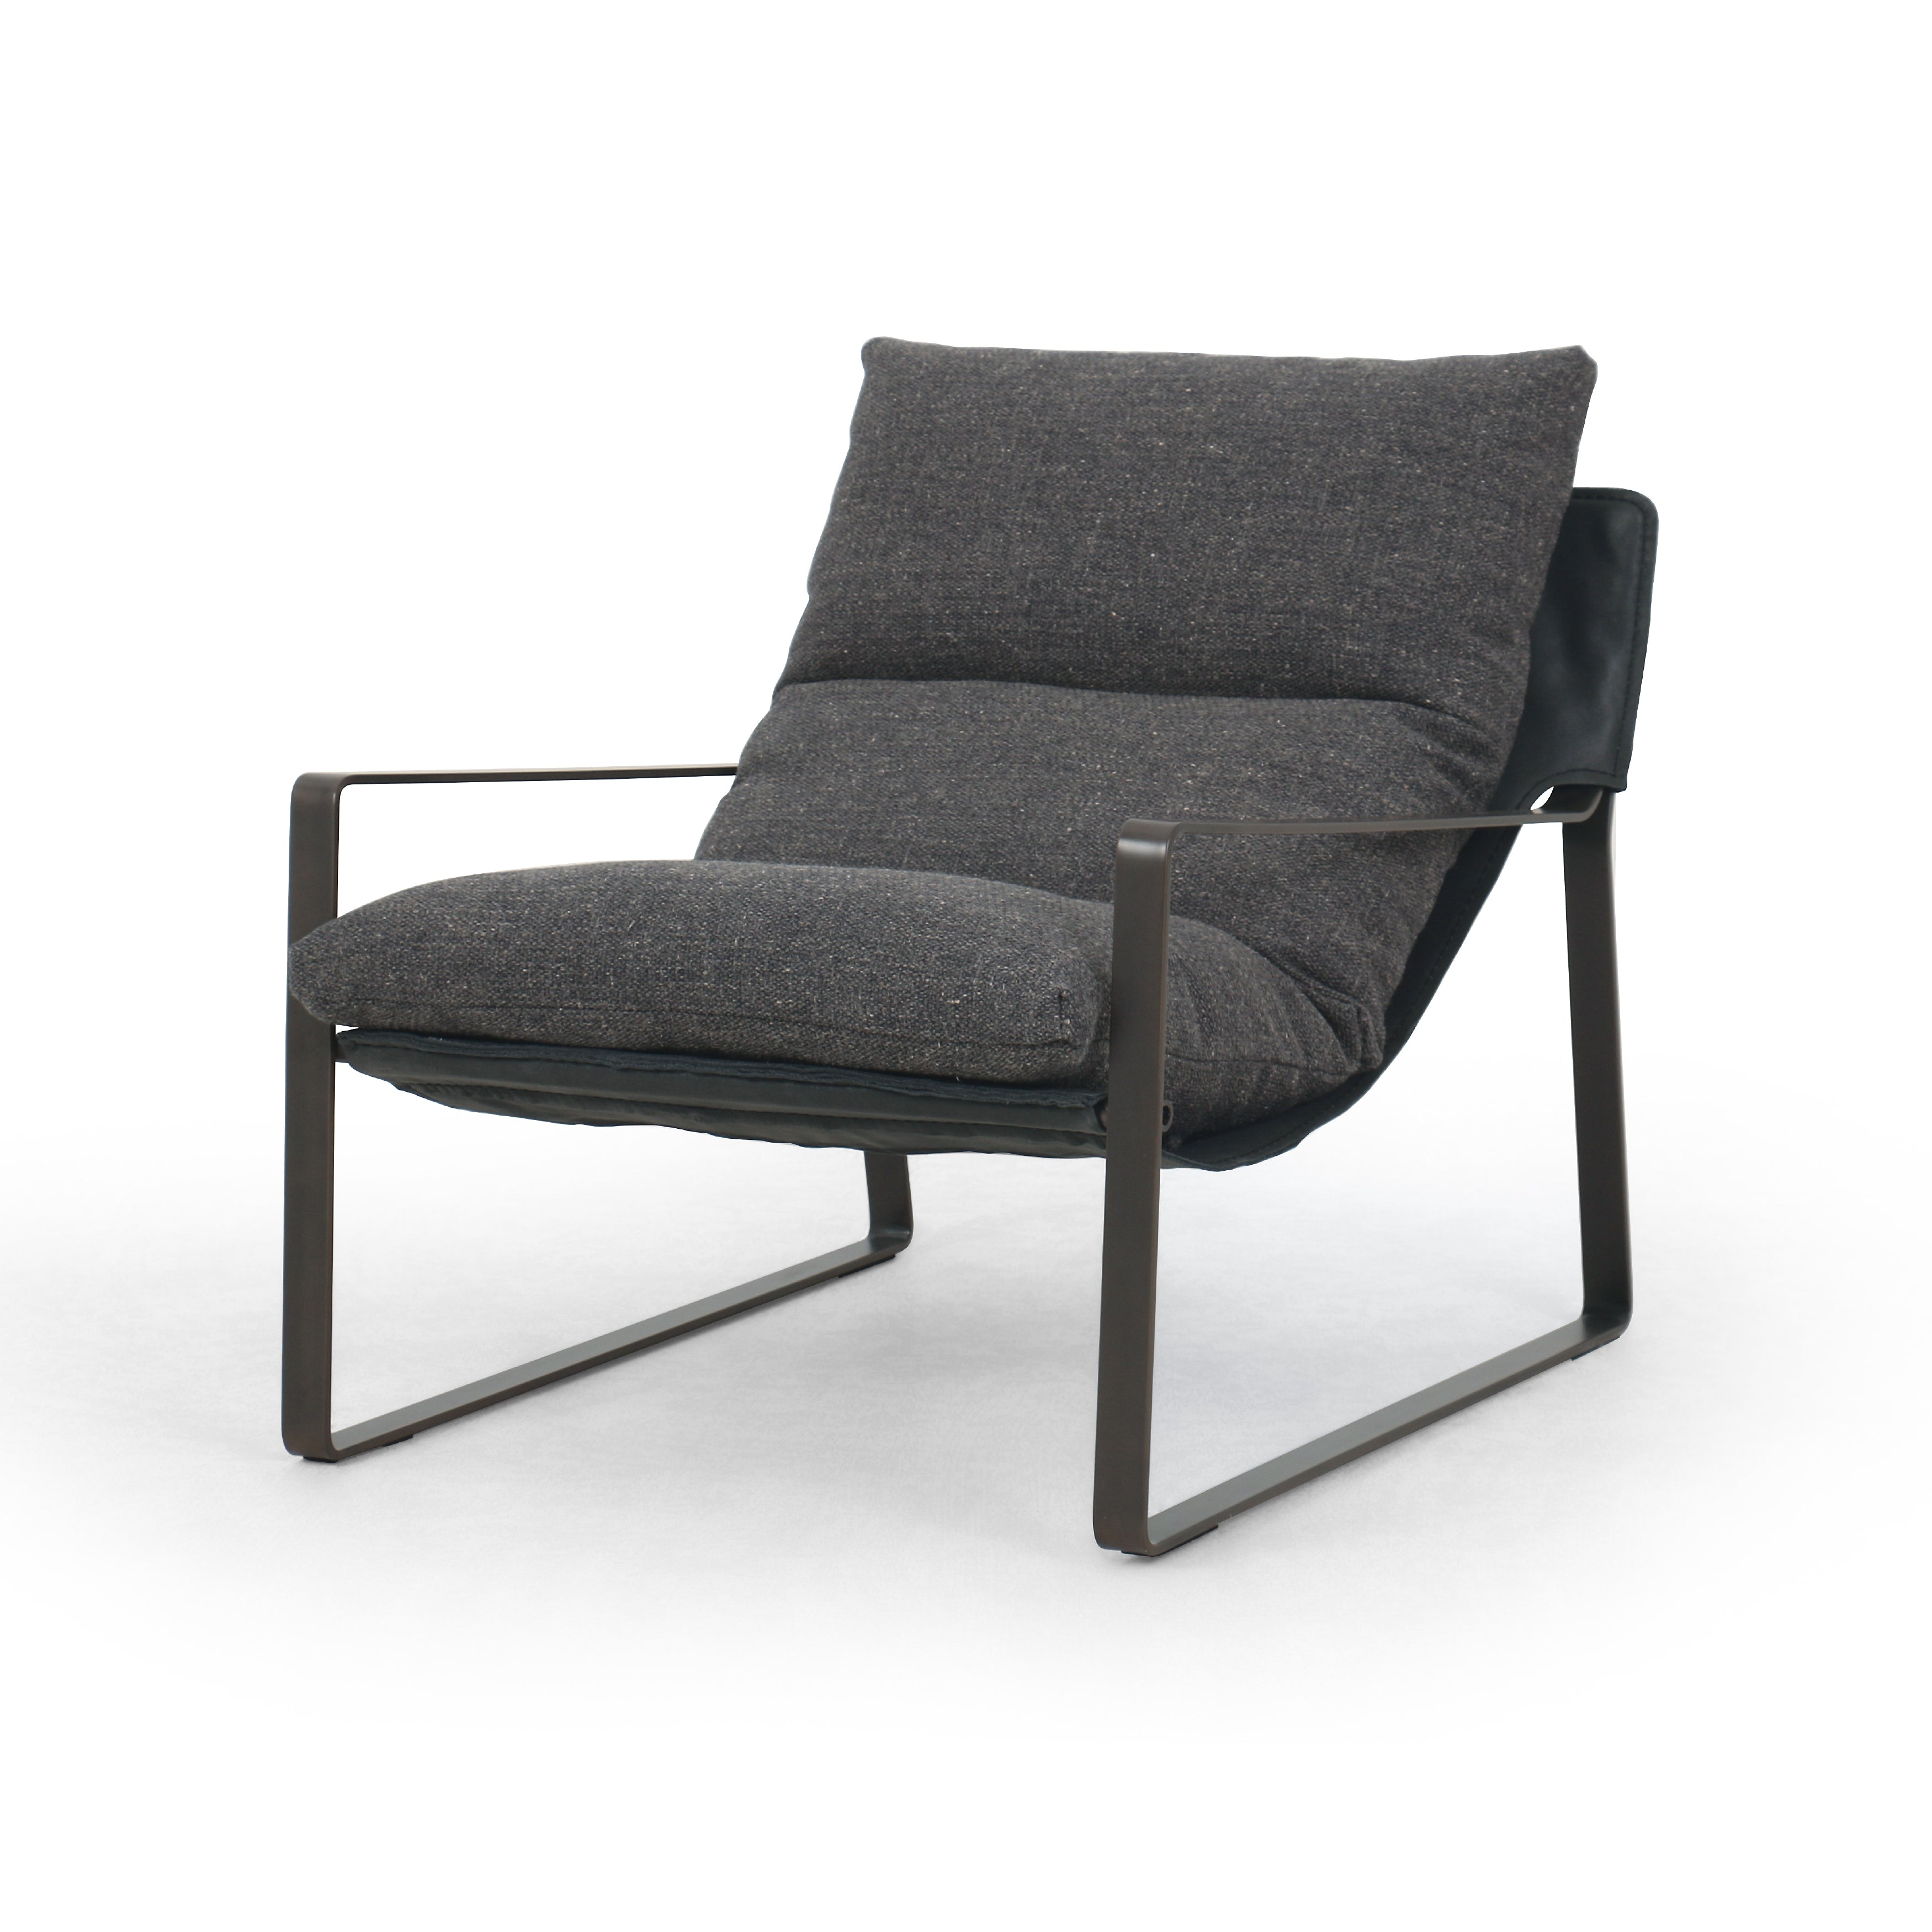 This Emmett Sling Chair - Thames Ash is super stylish and effortlessly cool. Sling-style seating of grey performance-grade upholstery exclusive to Four Hands sits low and curved for a fresh take on a throwback form. Industrial iron framing turns up the drama for any living room or office.   Overall Dimensions: 29.00"w x 36.00"d x 29.00"h Seat Depth: 20.0"